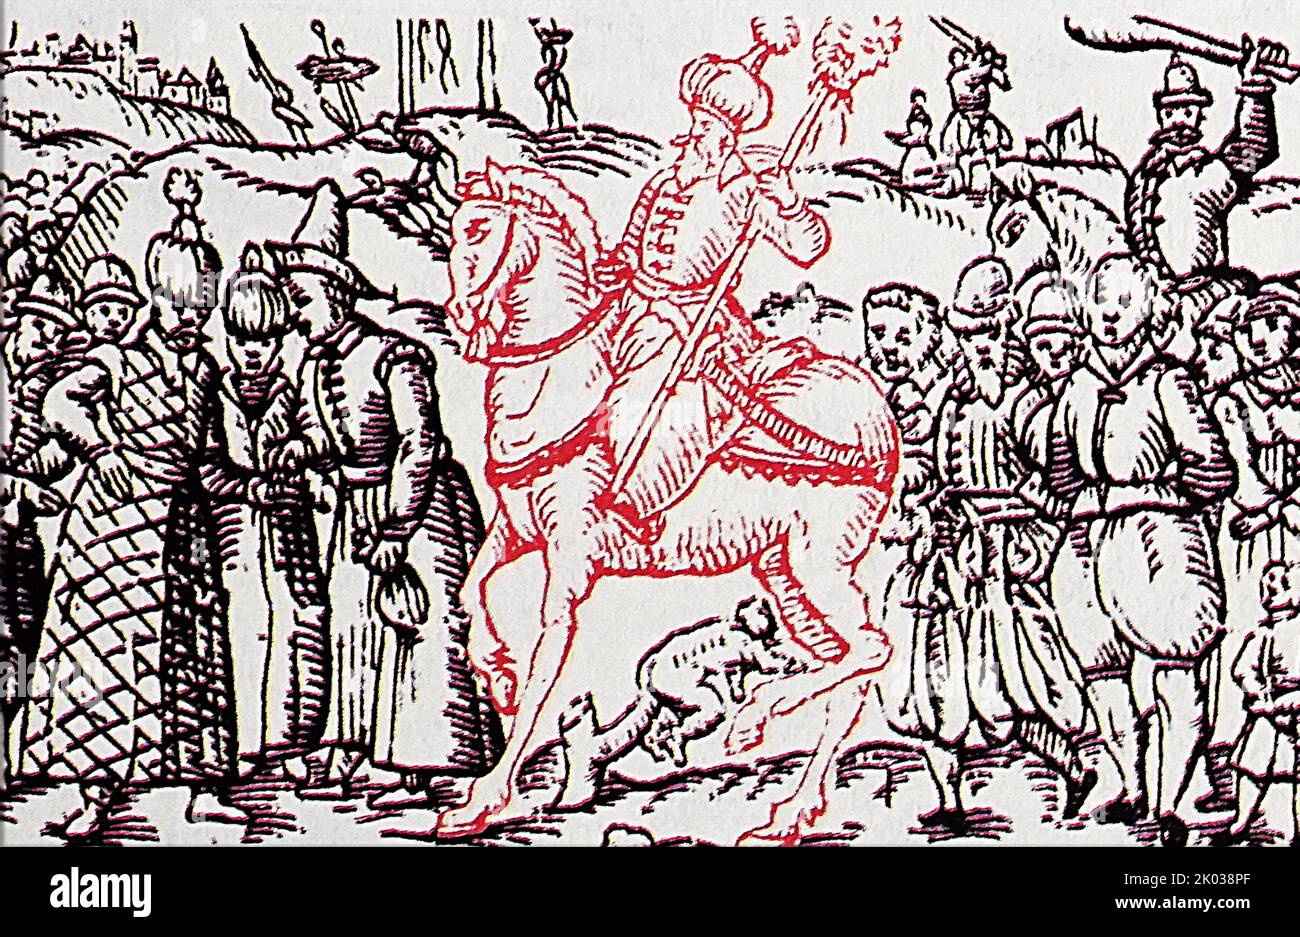 The oprichnina was a state policy implemented by Tsar Ivan the Terrible in Russia between 1565 and 1572. The policy included mass repression of the boyars (Russian aristocrats), including public executions and confiscation of their land and property. Stock Photo